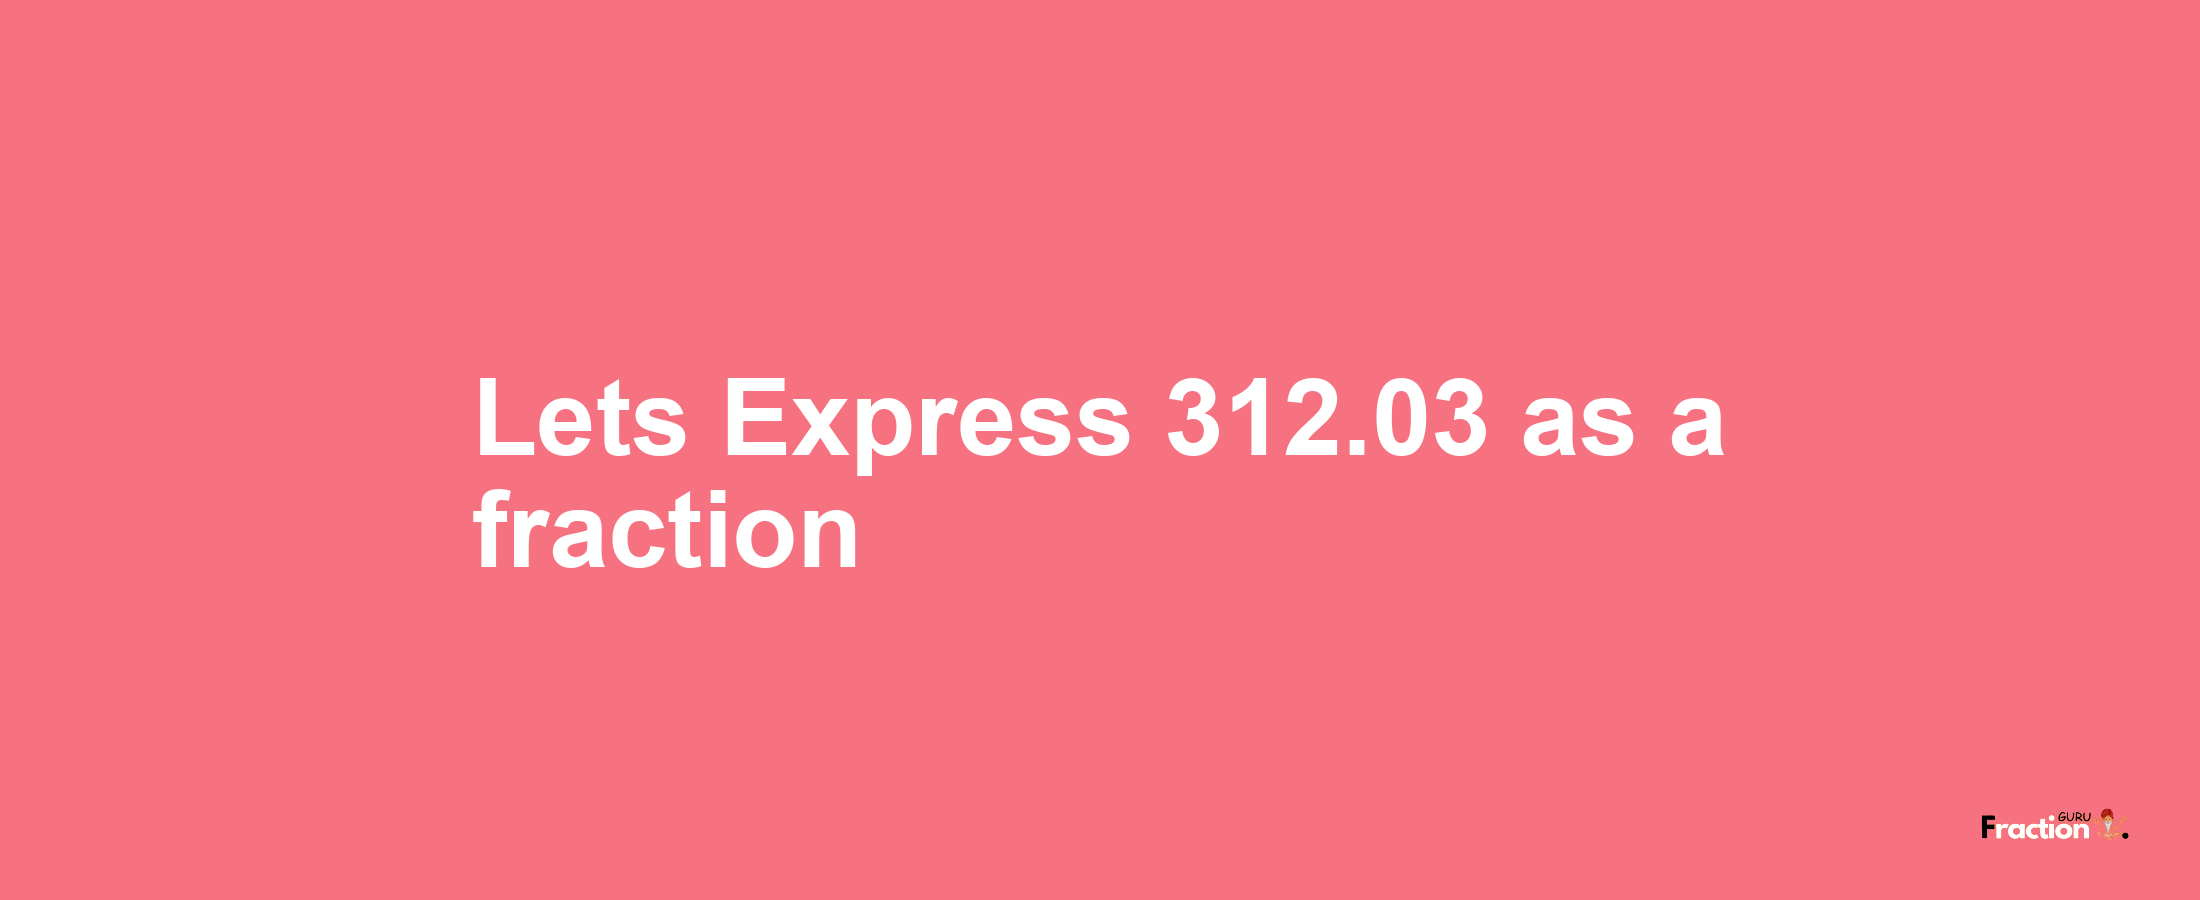 Lets Express 312.03 as afraction